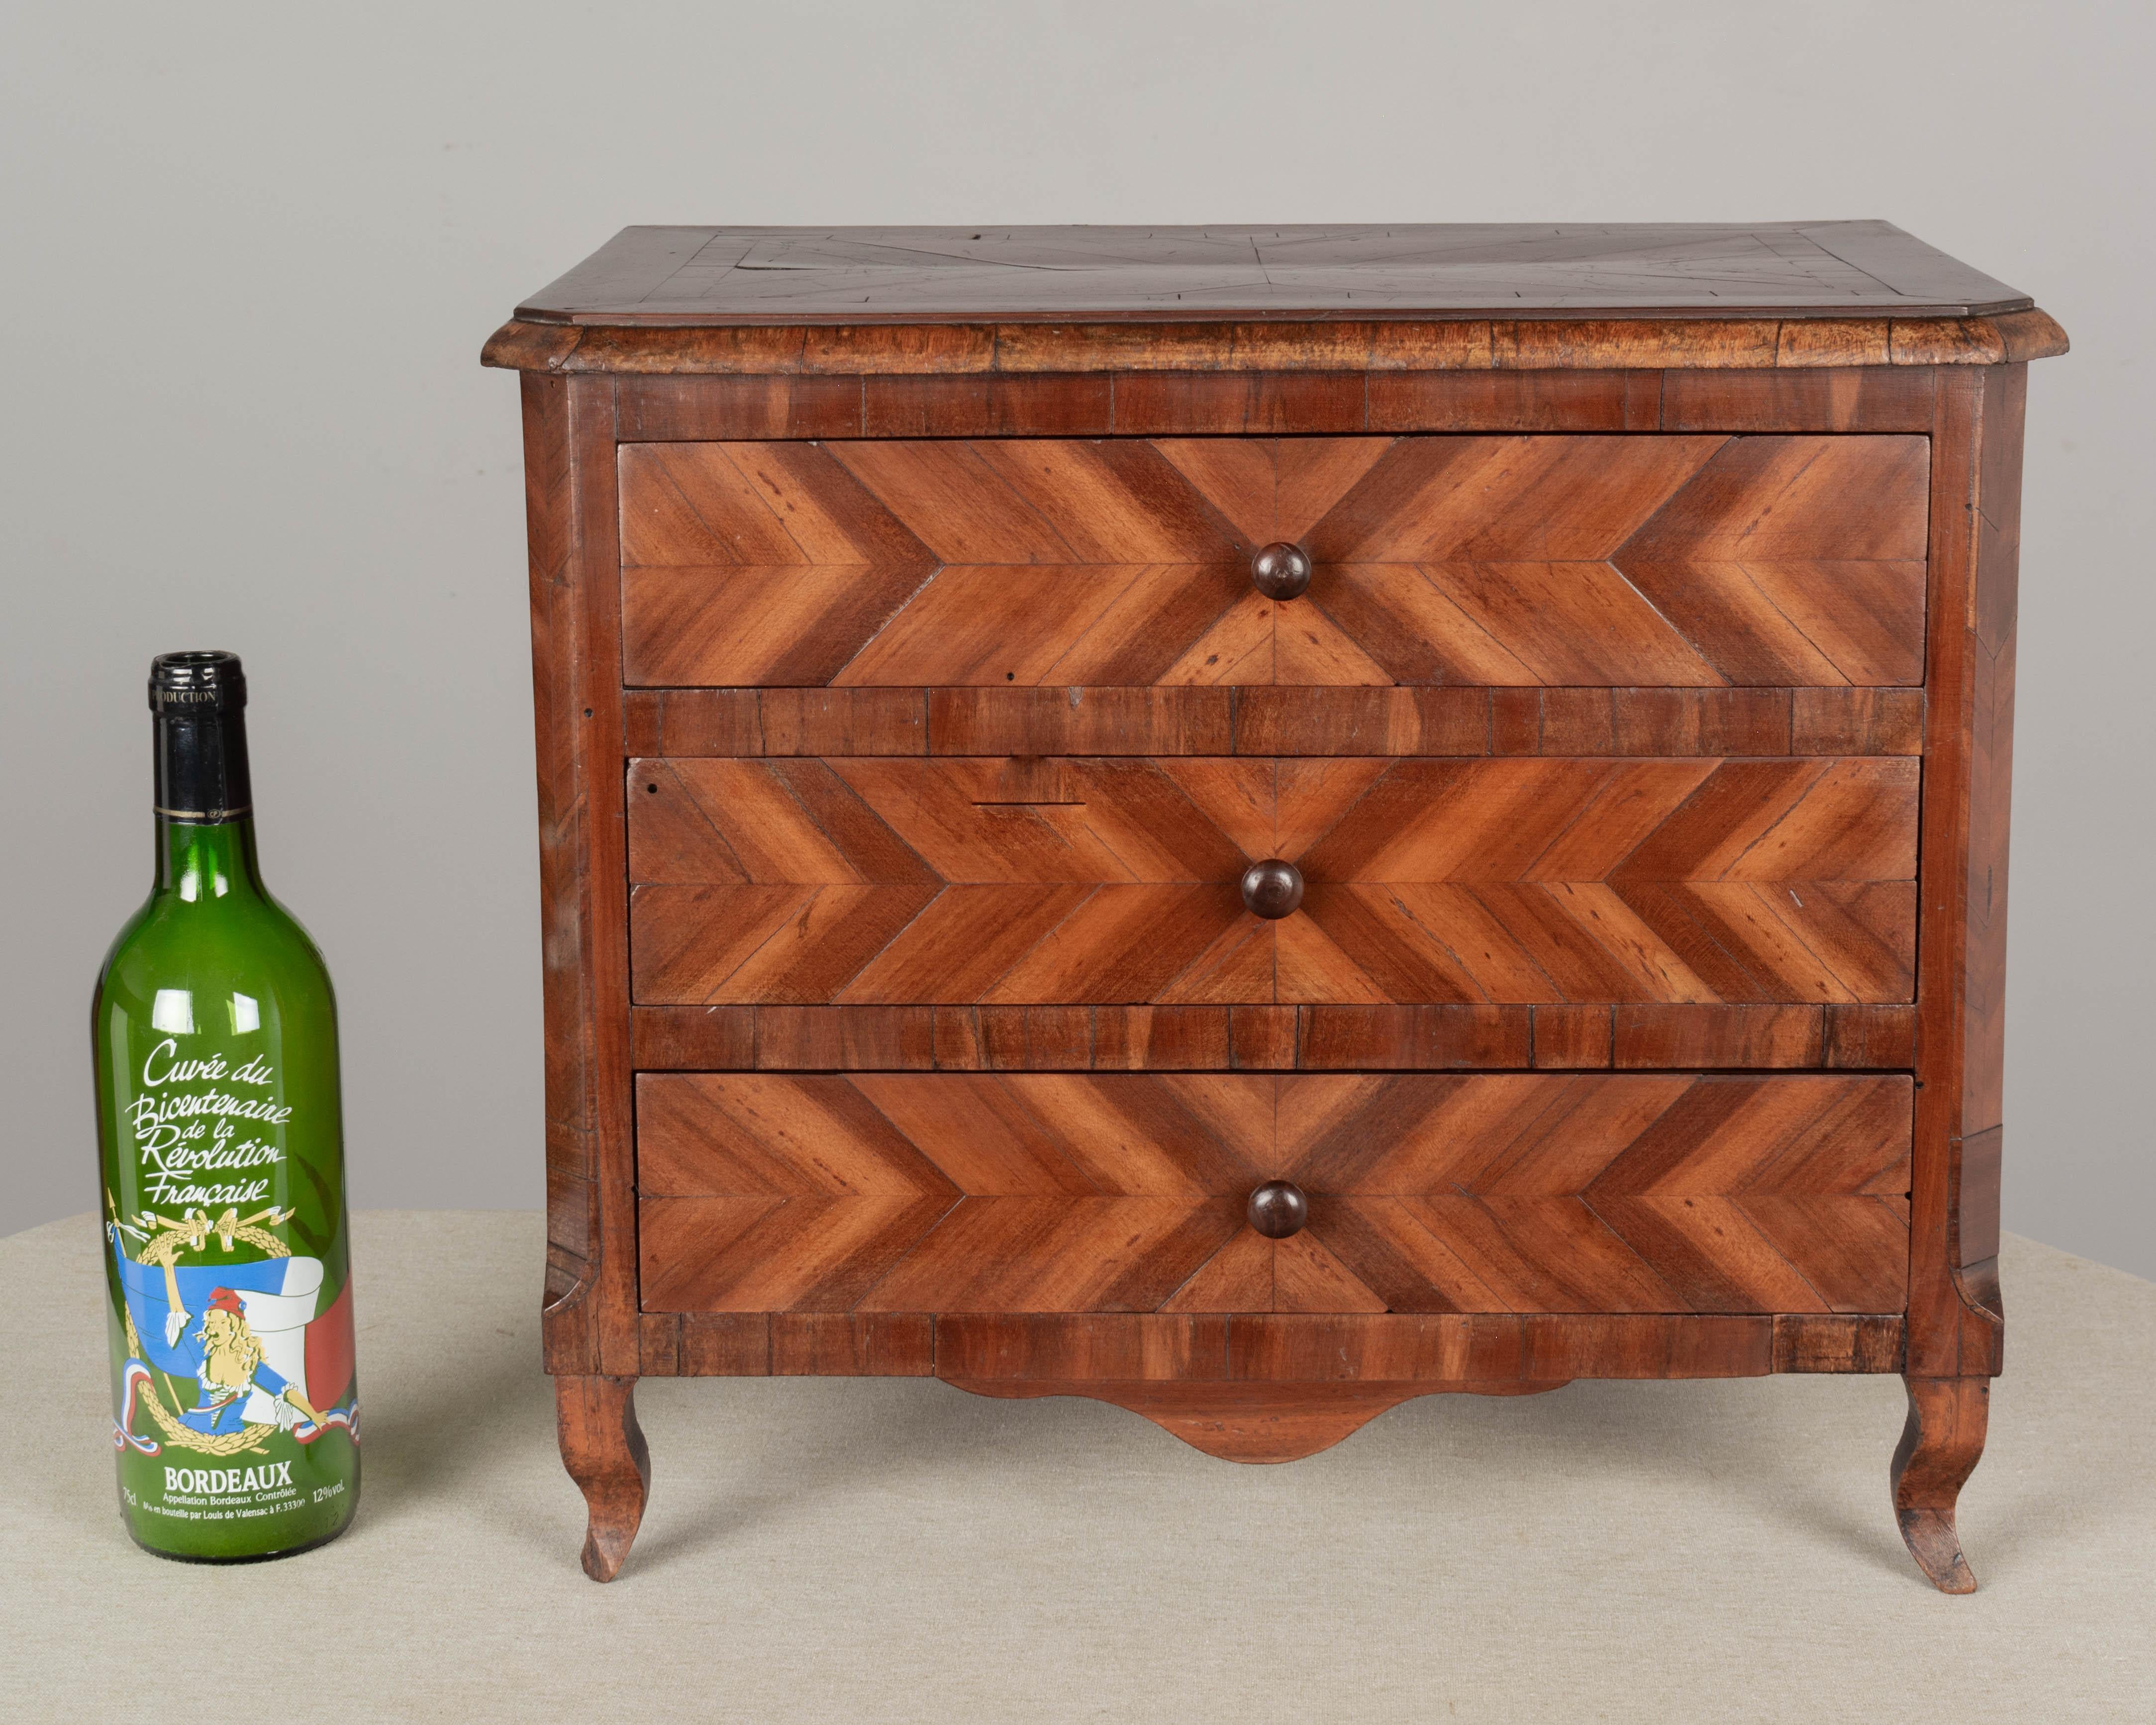 An early 19th century French marquetry commode de maitrise, or miniature sample commode. Made veneer of mahogany with pine and beech as a secondary woods. Three dovetailed drawers with herringbone patterned front and small turned knobs. In good